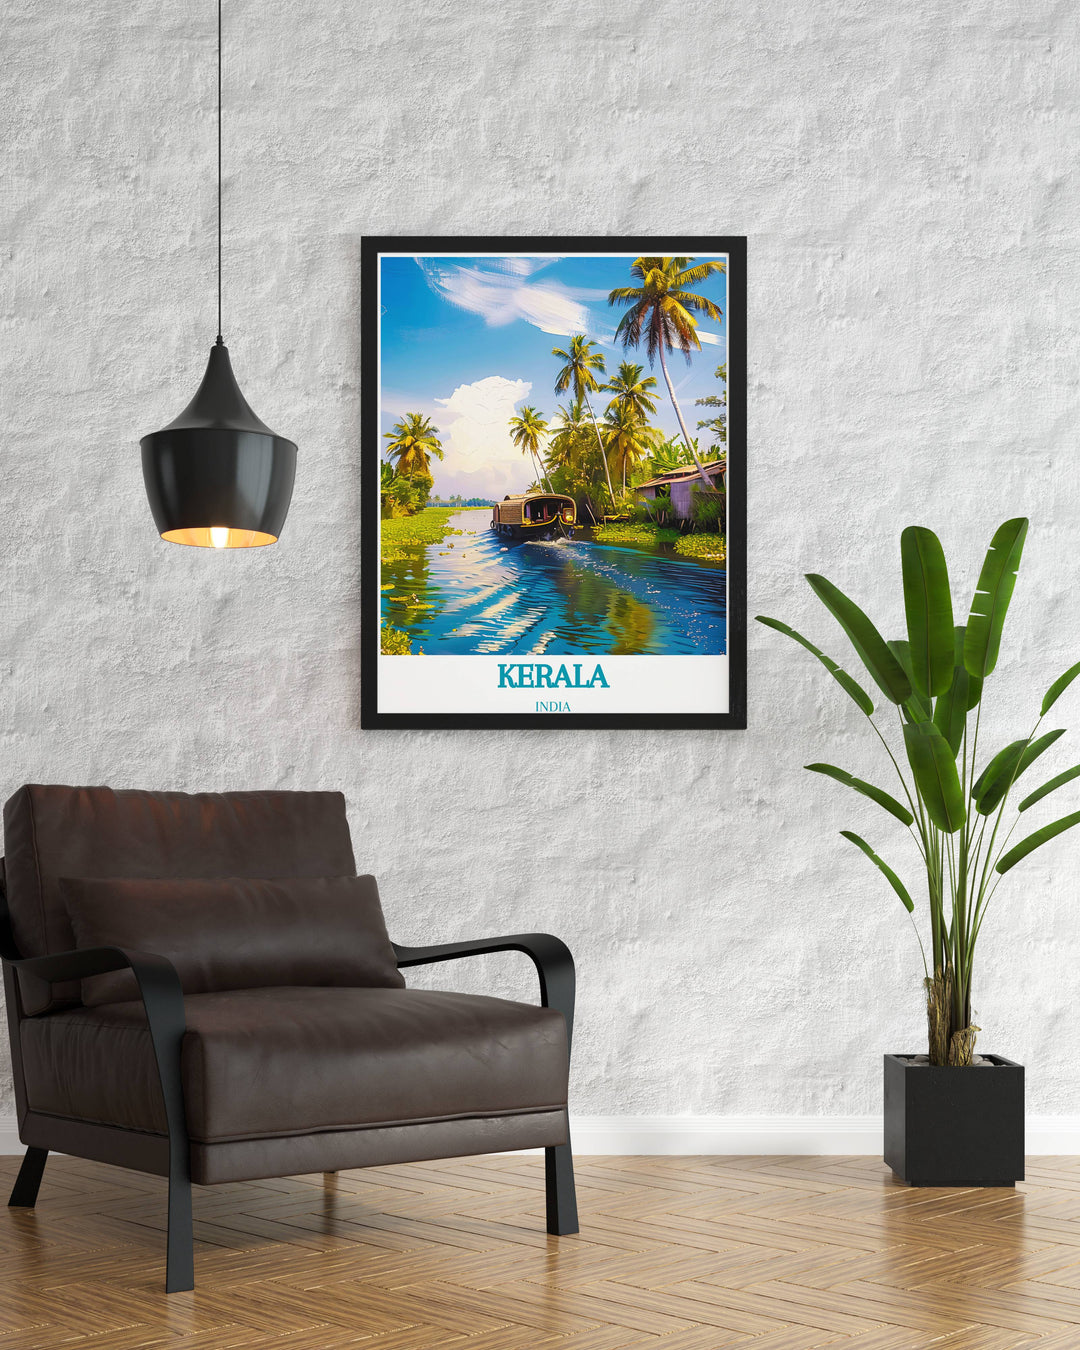 Framed art capturing the essence of Keralas traditional boats and rural beauty perfect for enhancing living spaces